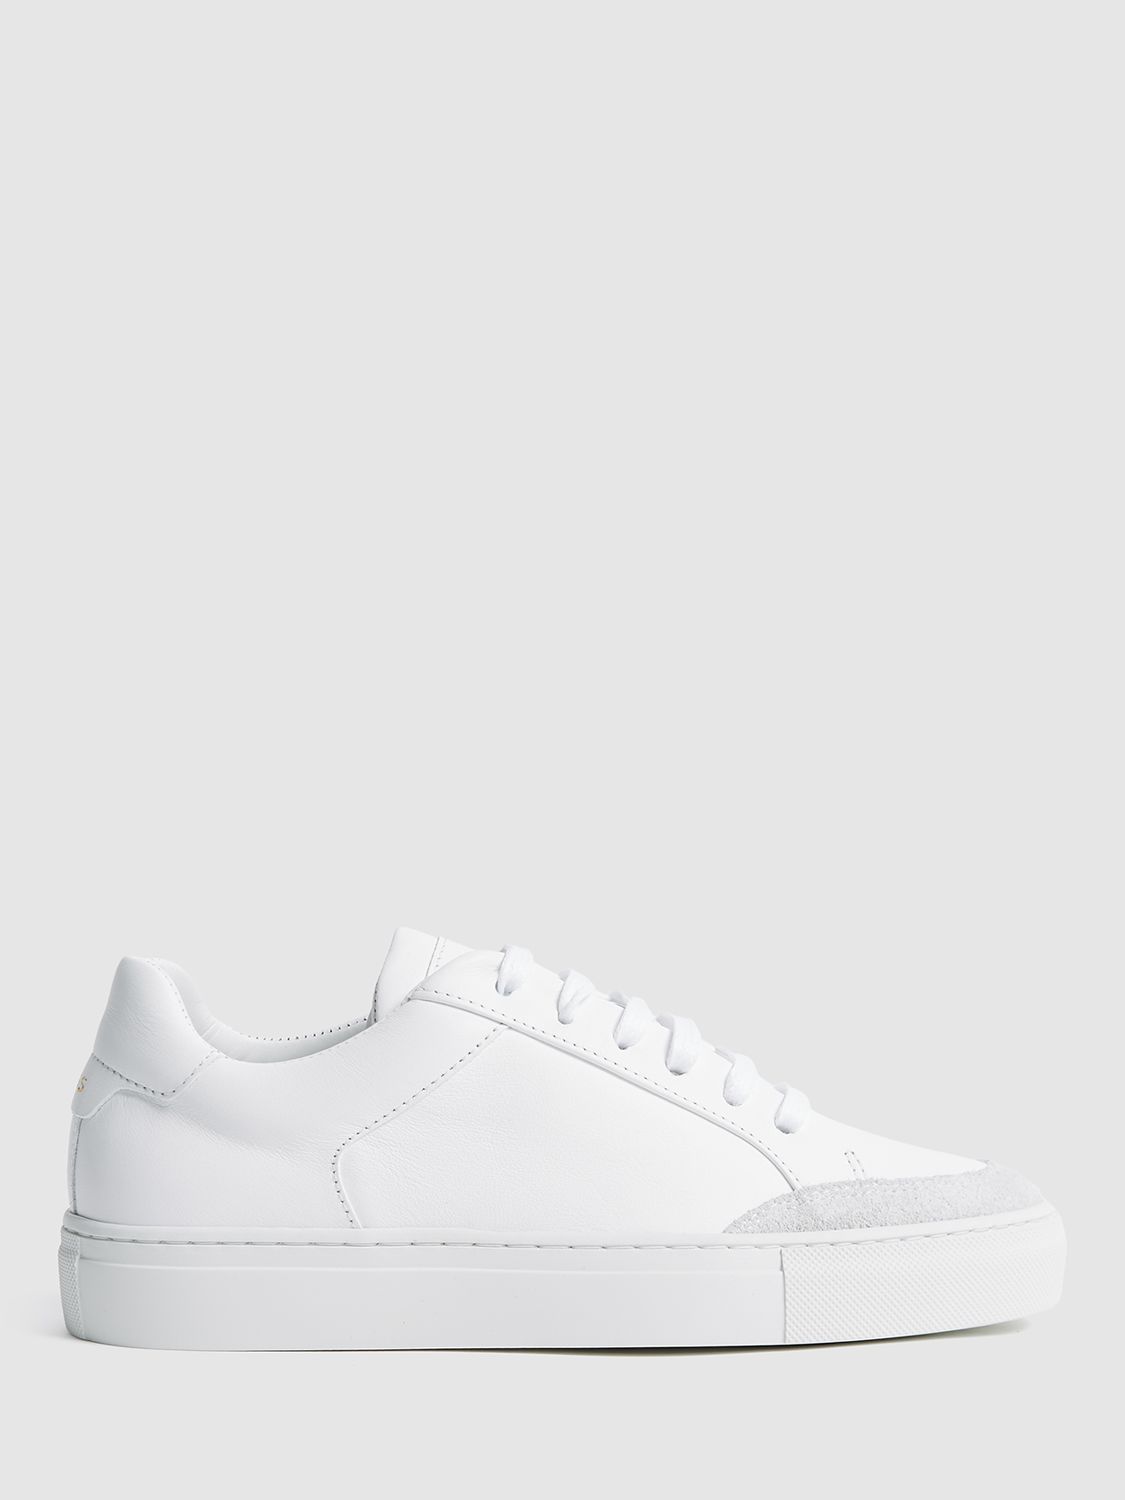 Buy Reiss Ashley Leather Low Top Trainers Online at johnlewis.com